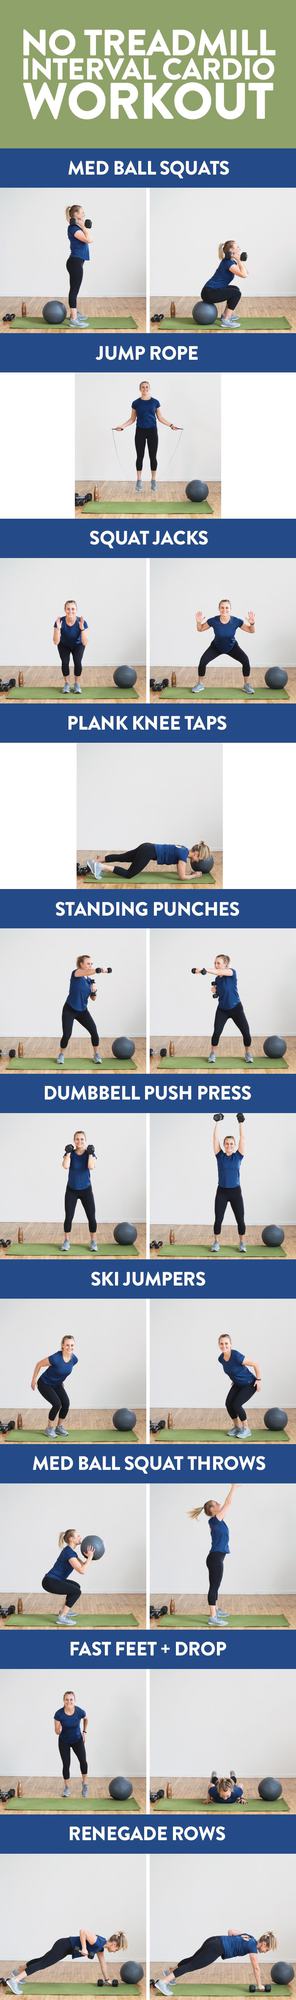 Get in all of your steps with his challenging, no-treadmill interval cardio workout. You can do this cardio workout at home or at the gym with just a set of dumbbells and a medicine ball!